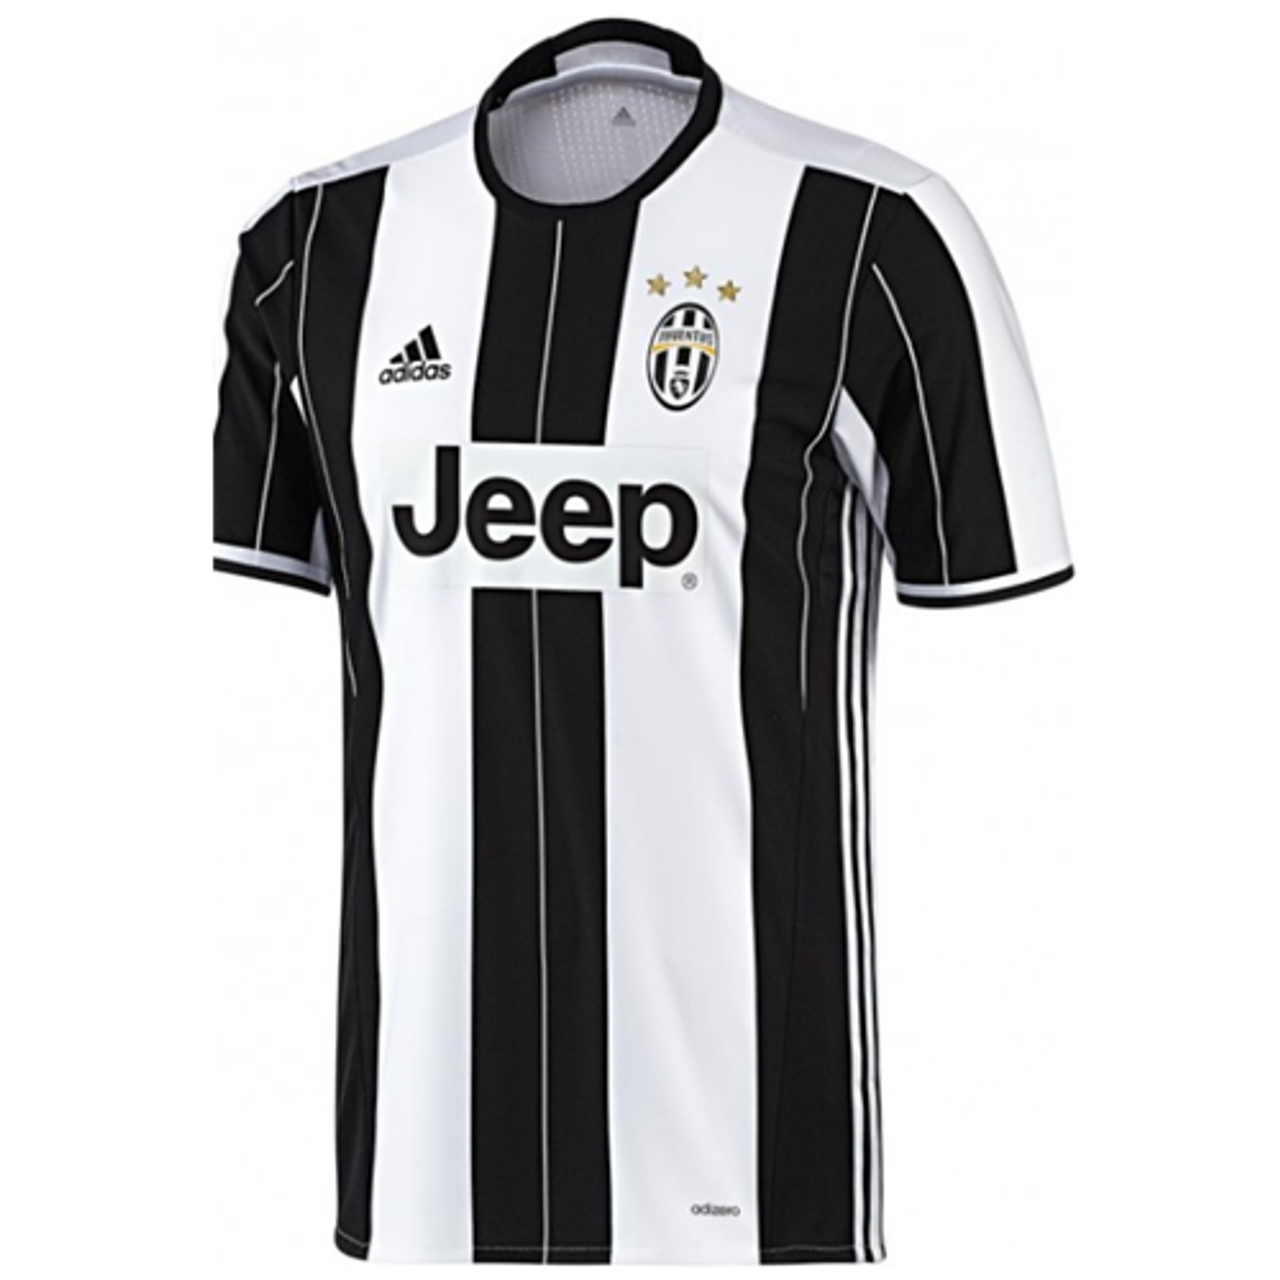 black and white jeep jersey